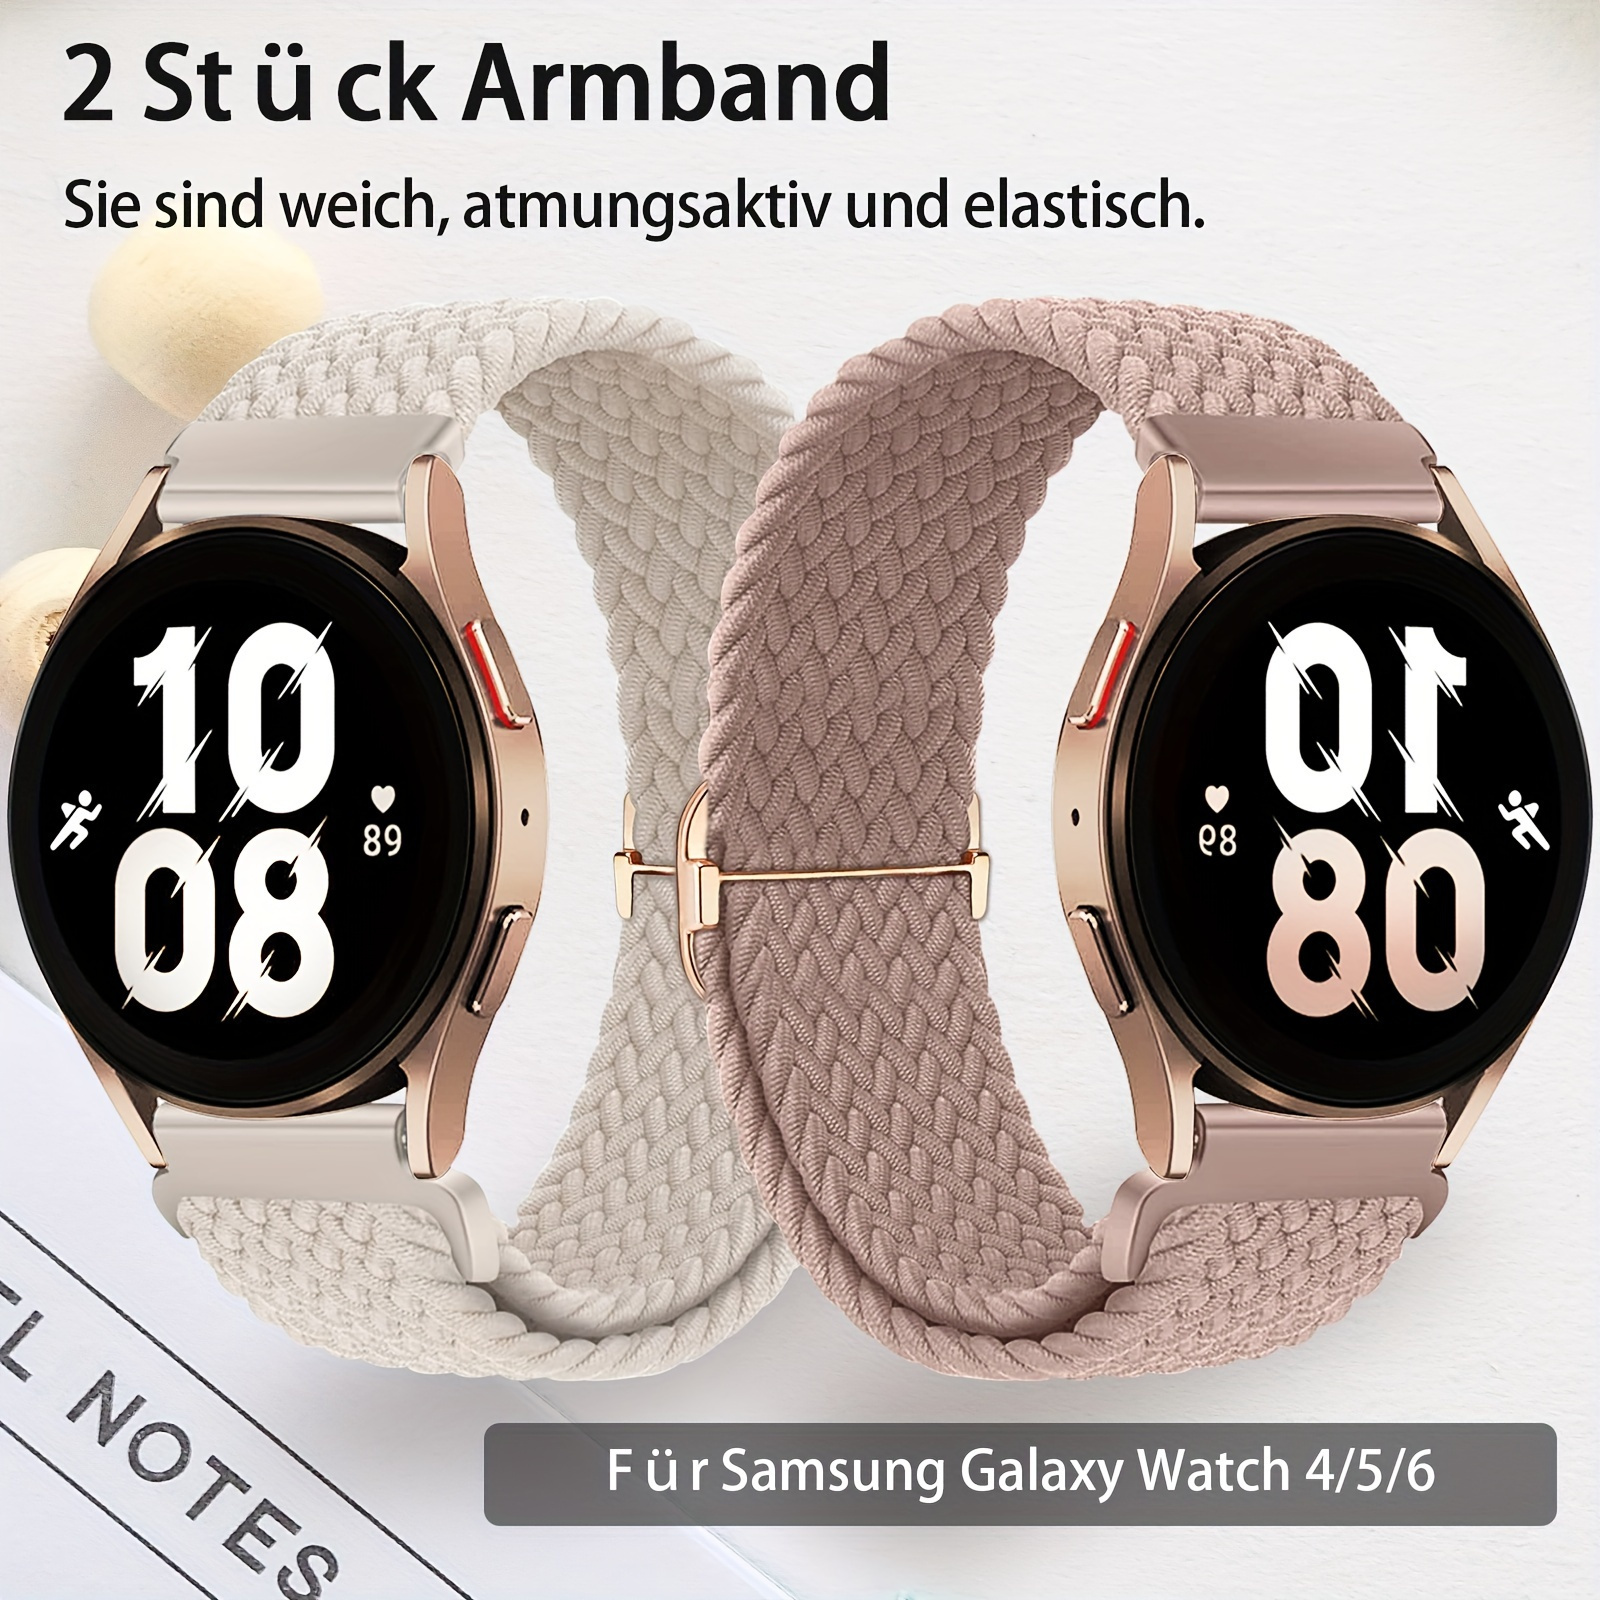 

2 Packs Braided Bands Compatible With Samsung Galaxy Watch Active 2 Bands 40mm 44mm/active 40mm/galaxy Watch 3 41mm/galaxy Watch 42mm/gear S2/galaxy Watch 4 5 6 Fabric 20mm Wristband